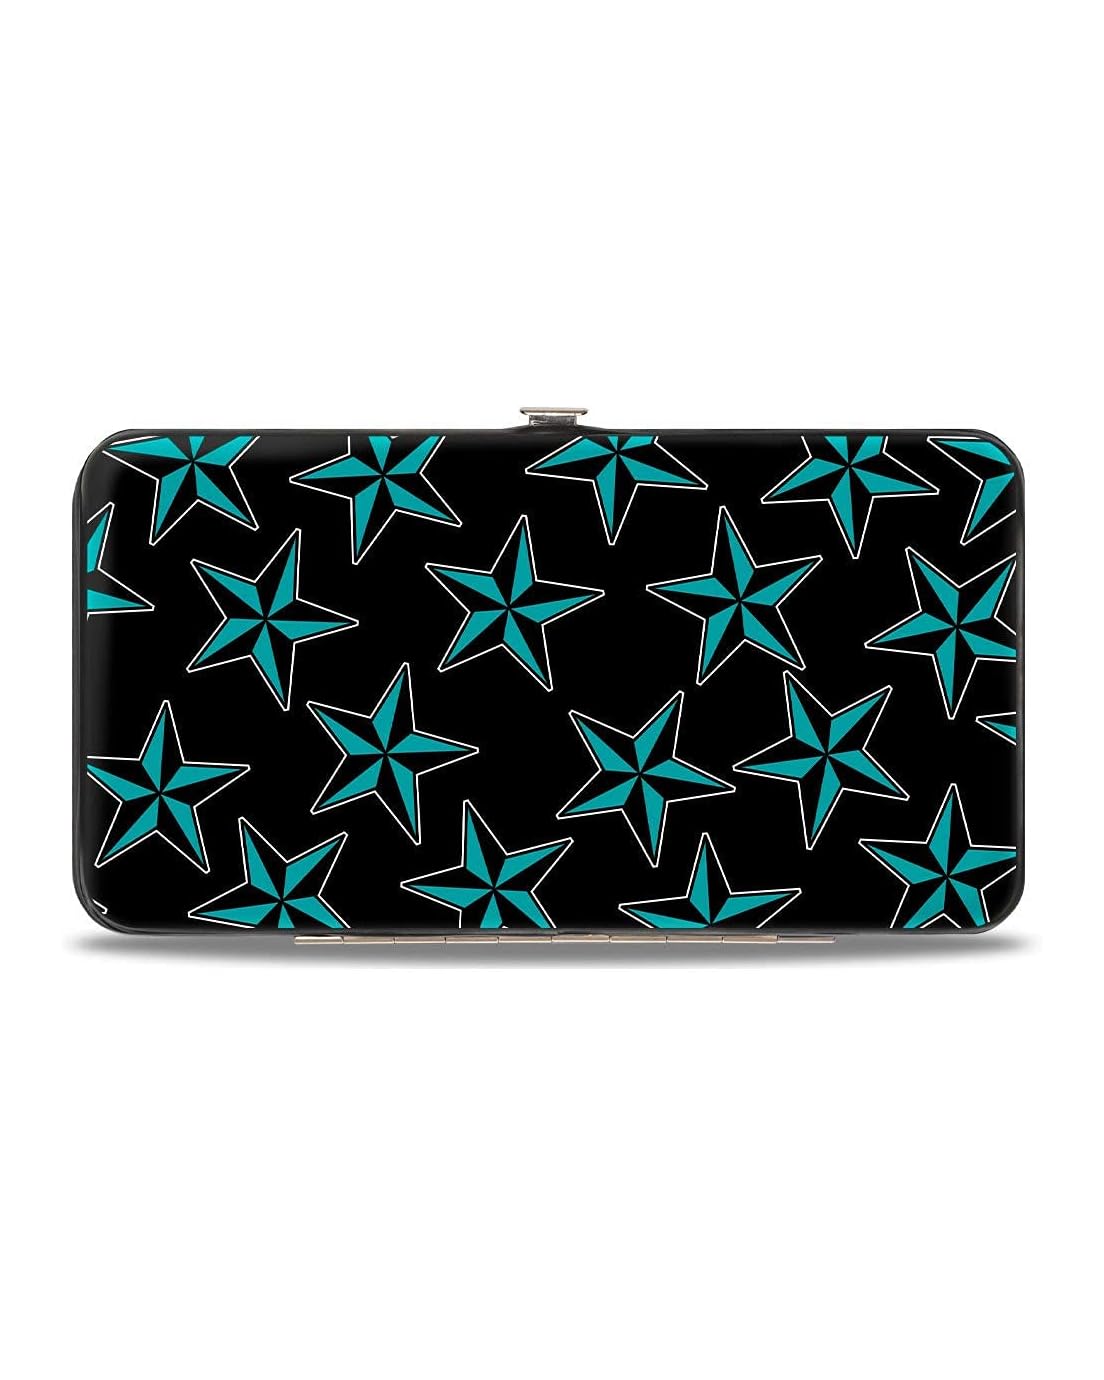 Buckle-Down Hinge Wallet - Nautical Stars Scattered Black/Turquoise